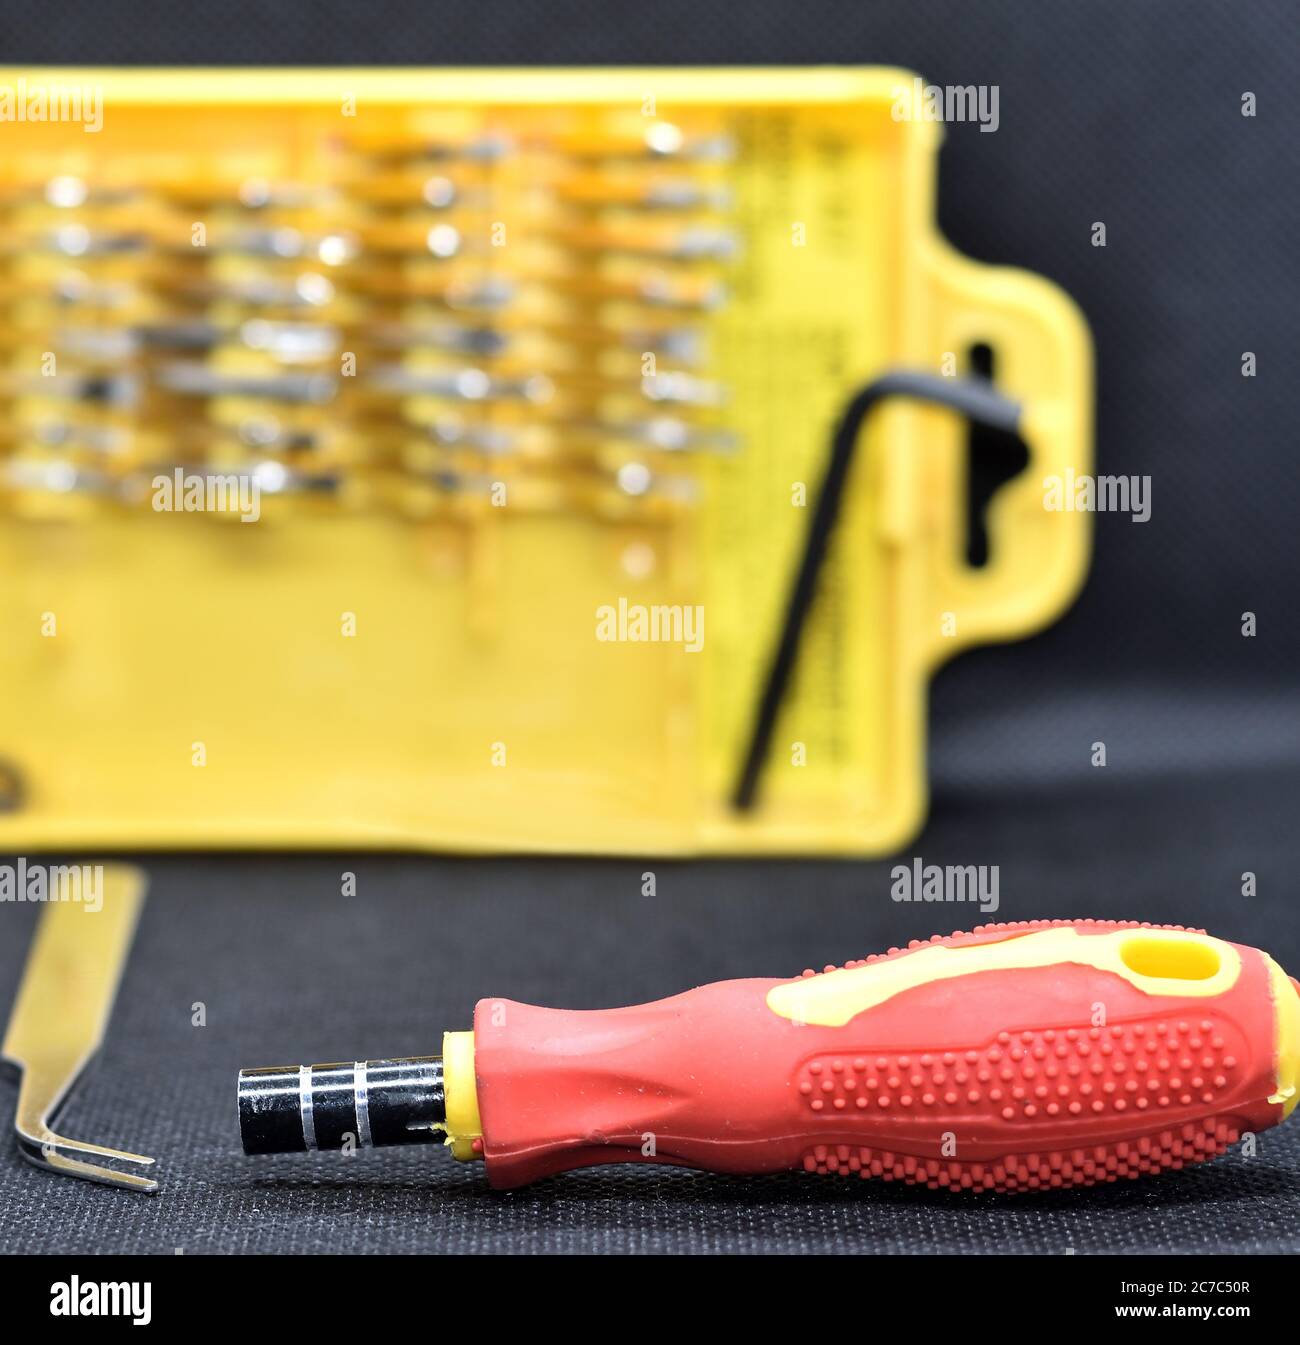 Multiple set of screwdrivers allows to open cover of any component or accessories easily and without damage Stock Photo